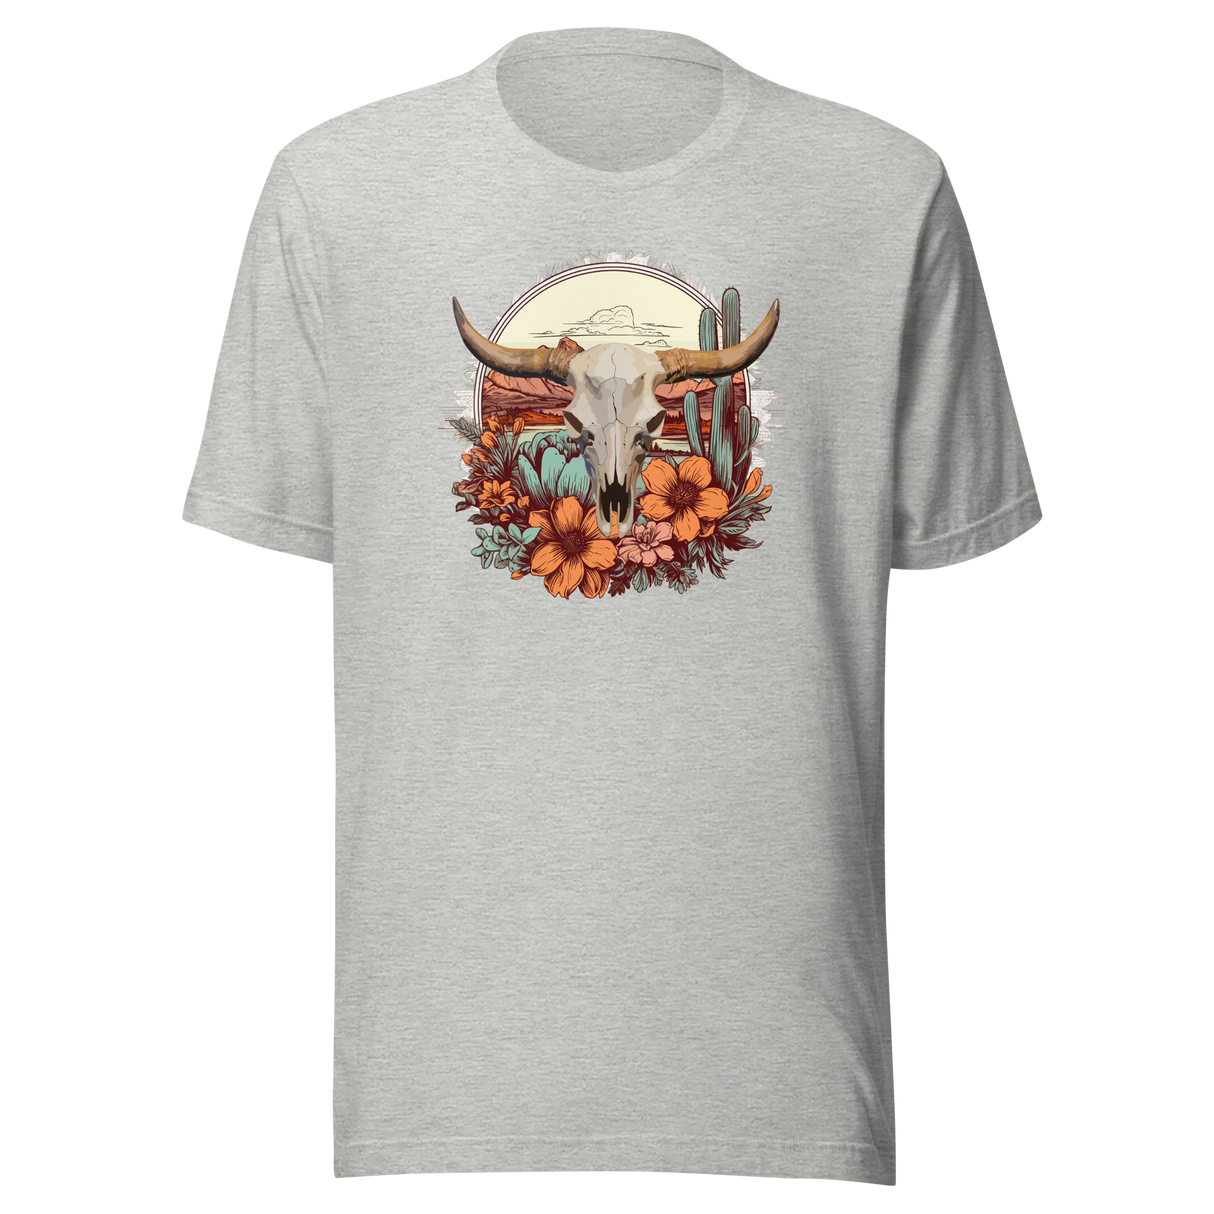 desert-scene-with-skull-and-flowers-mountains-outdoors-tee-desert-t-shirt-outdoors-tee-t-shirt-t-shirt-women-tee#color_athletic-heather